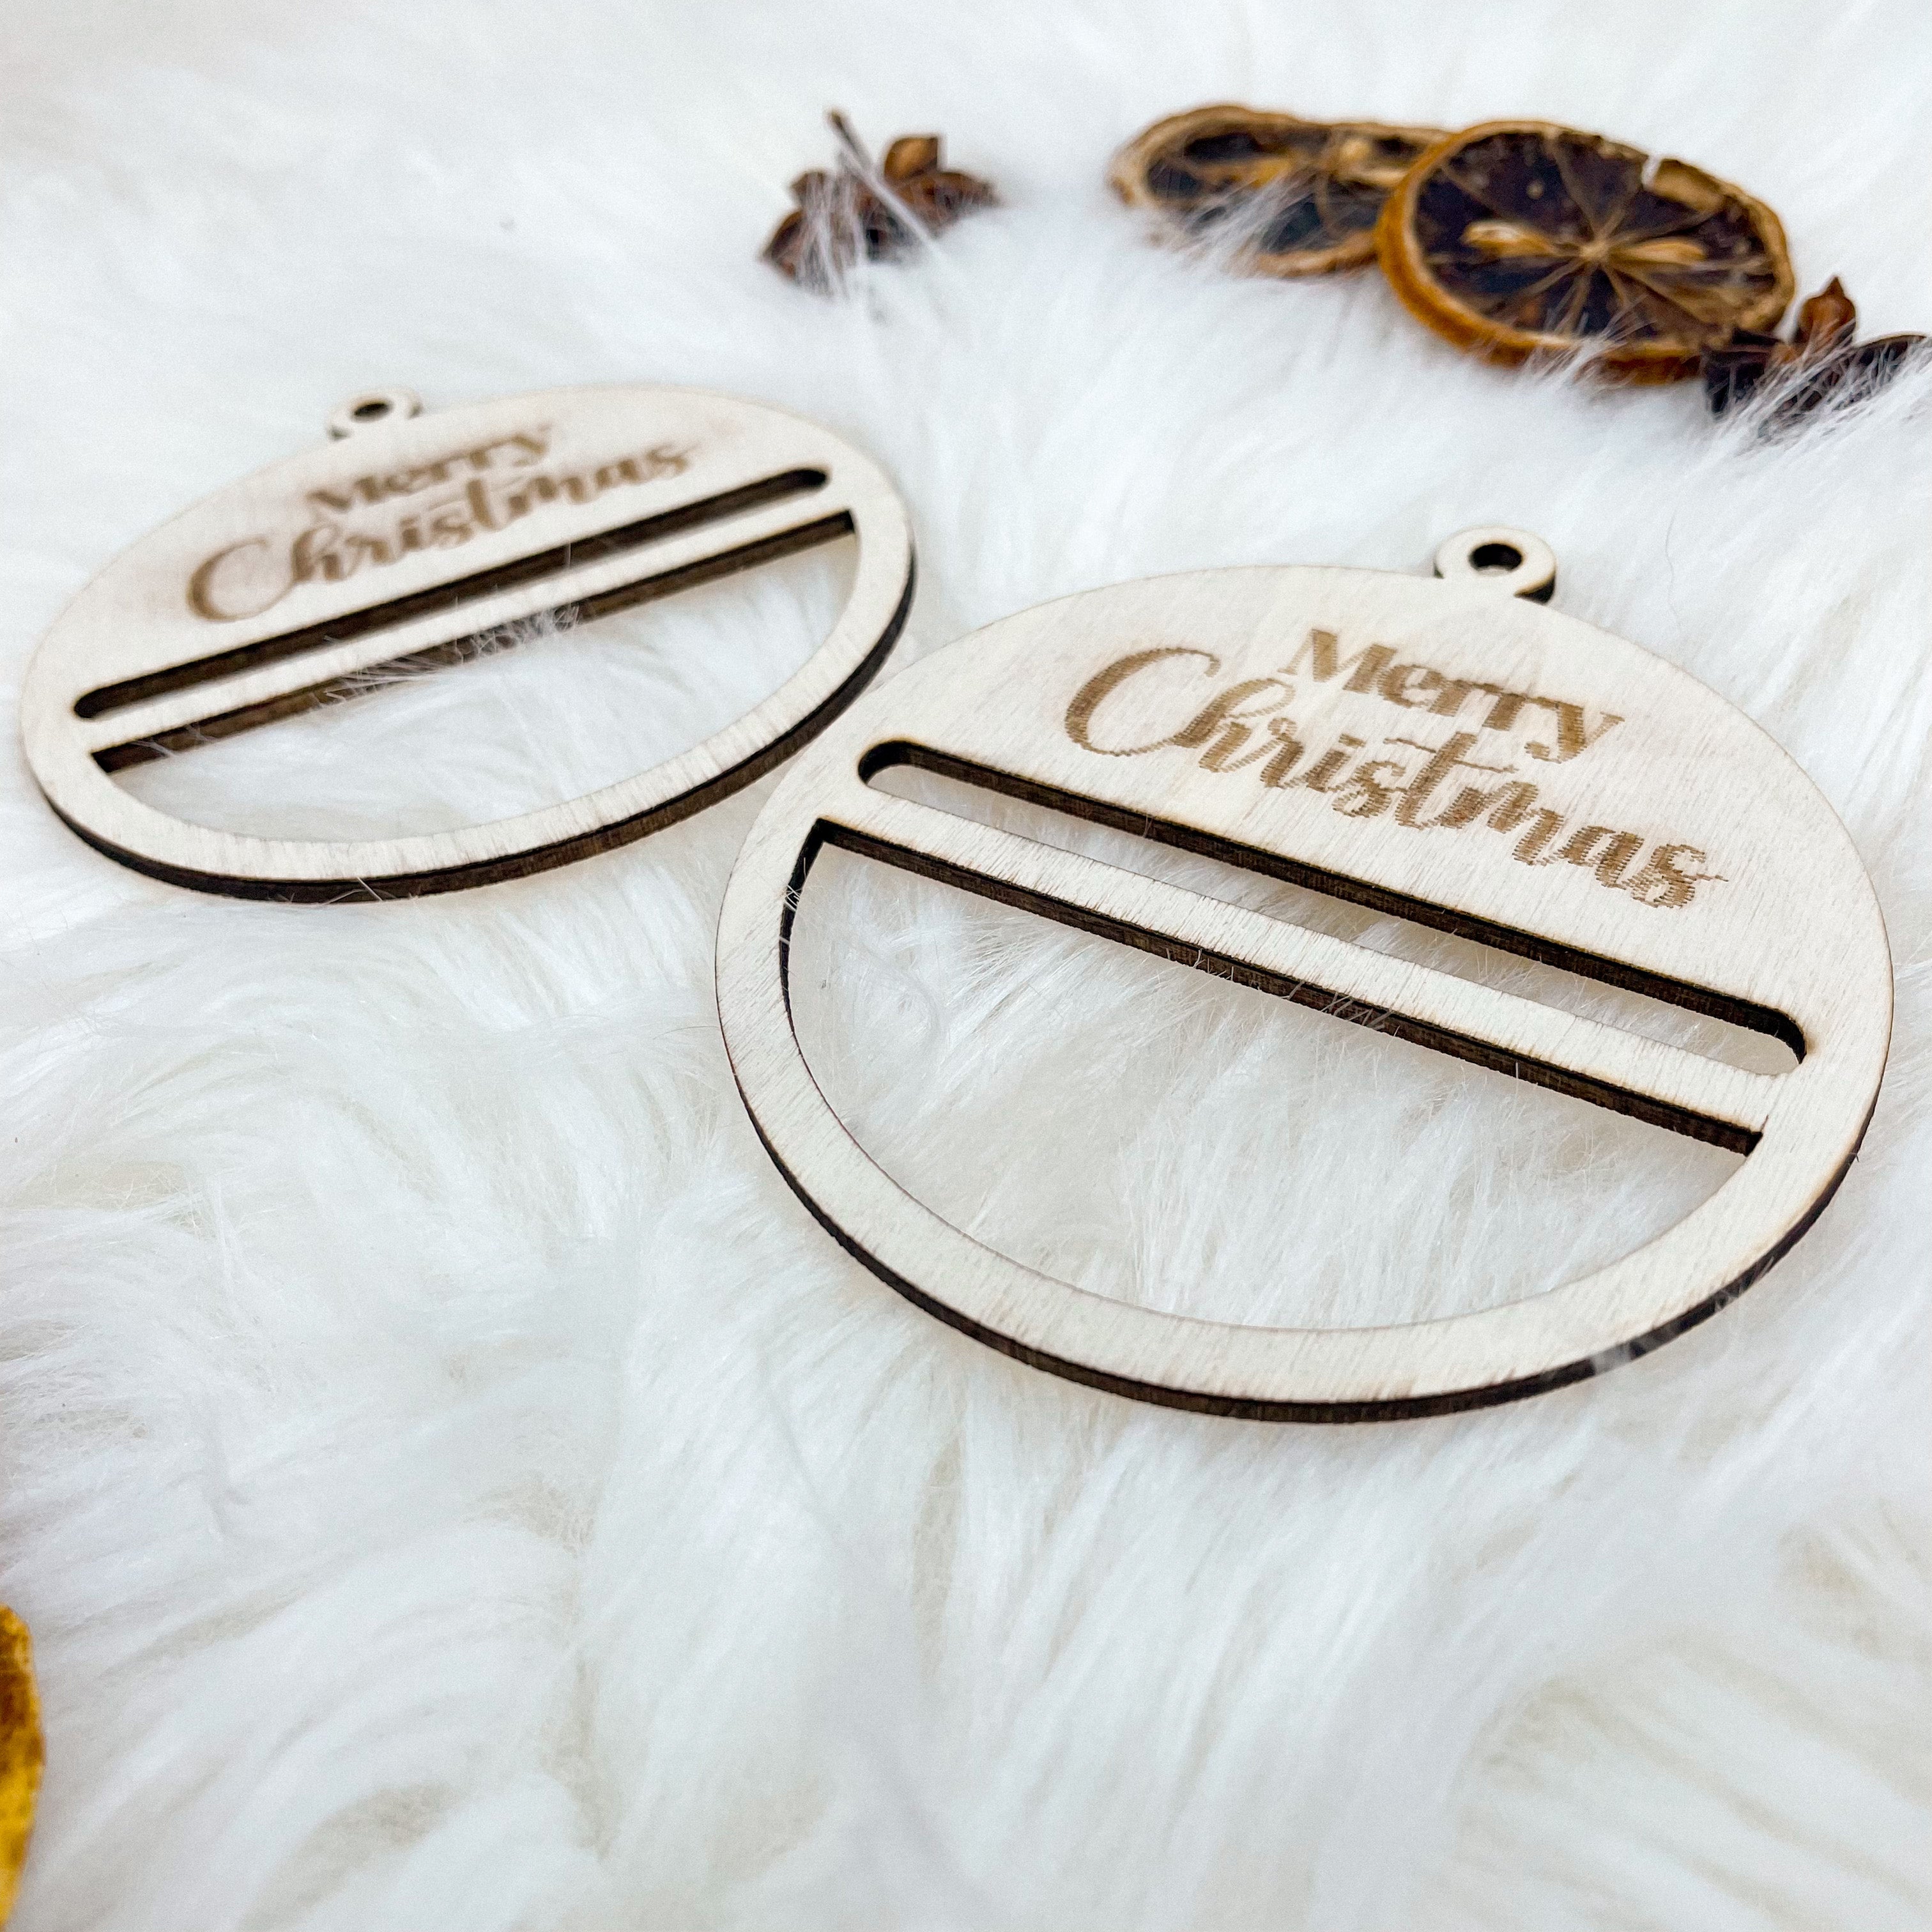 2pcs - Laser Cut Merry Christmas Round Ornament For Christmas Tree